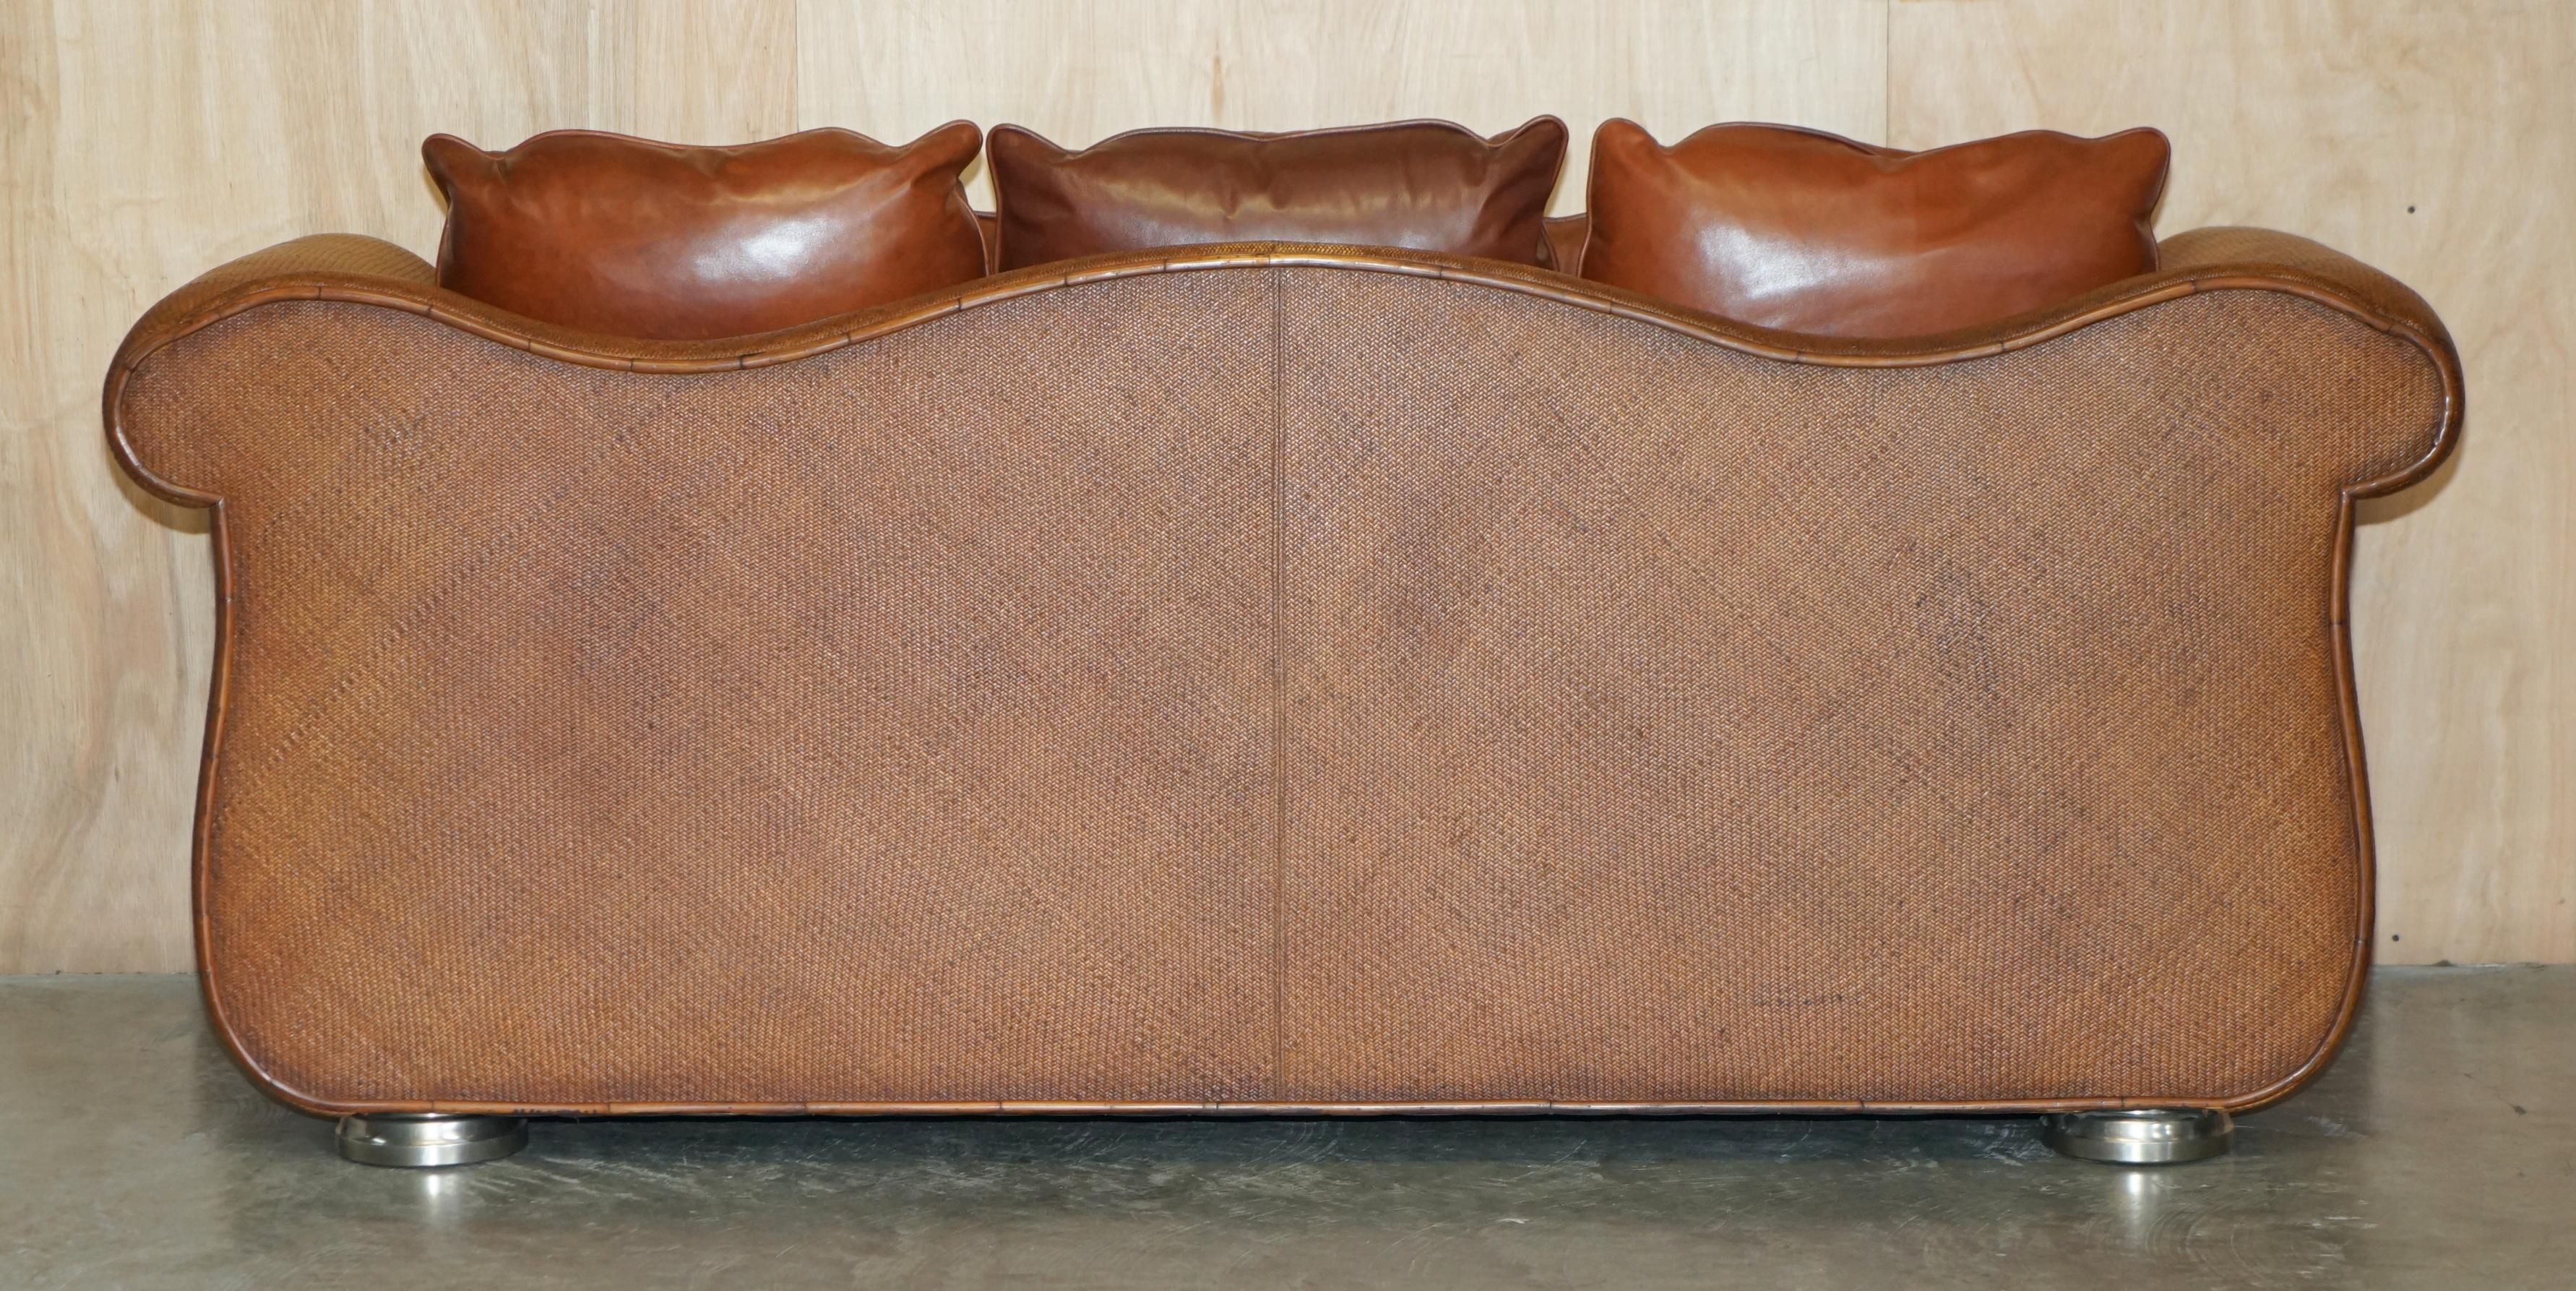 RARE PAIR OF THOMASVILLE SAFARI BROWN LEATHER WOVEN SOFAS PART OF LARGE SUITe For Sale 9